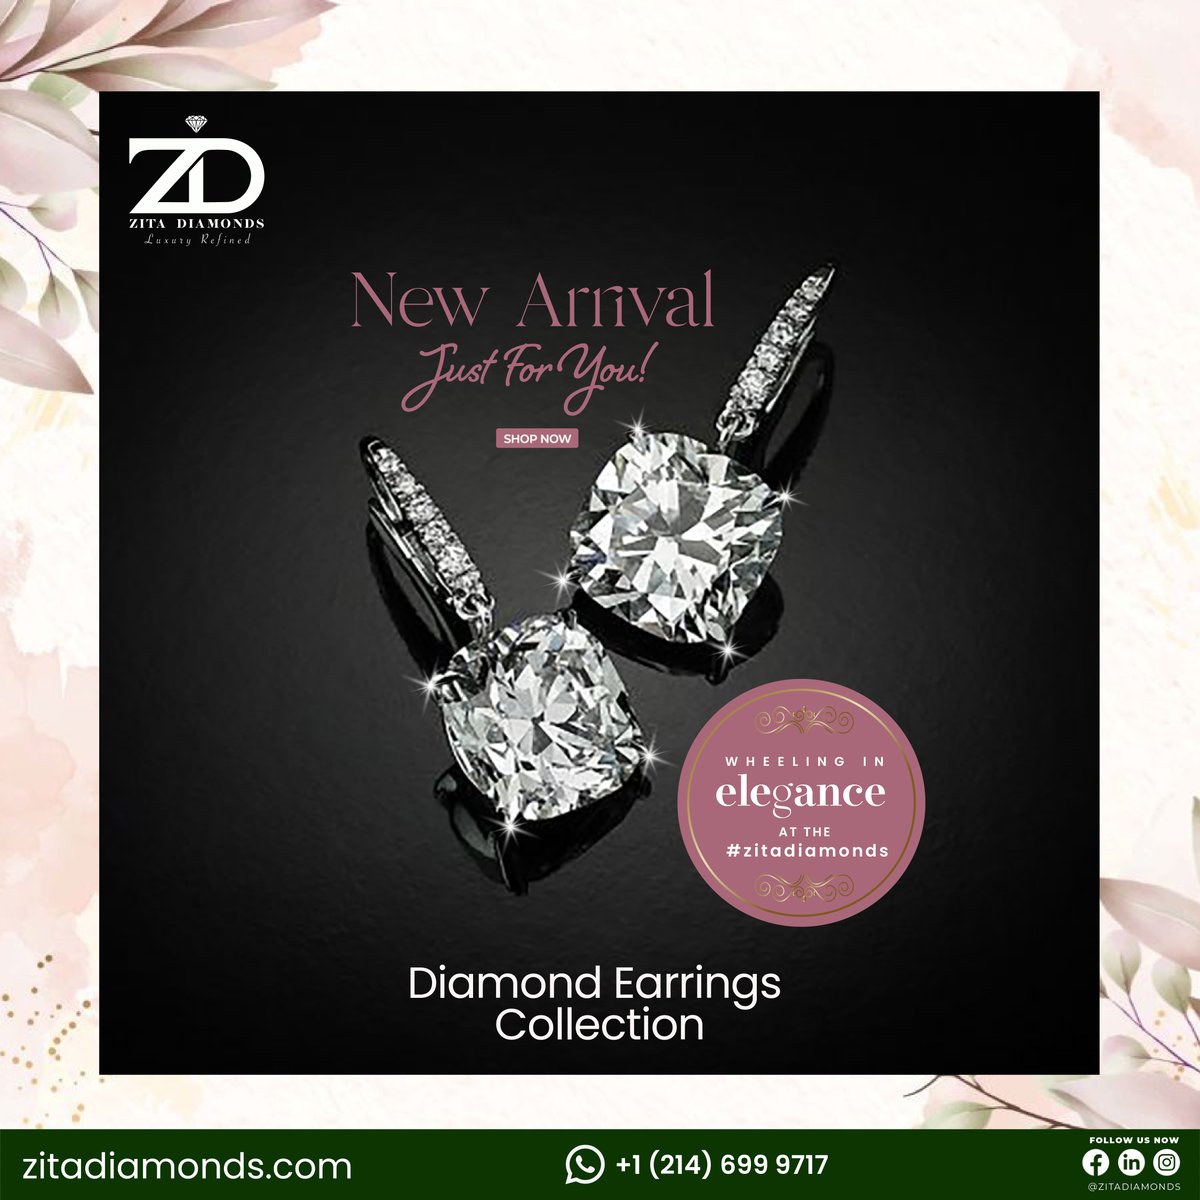 Introducing our latest collection: lab-grown diamond stud earrings! Ethically made, eternally radiant. Perfect for any occasion. 
.
.
.
.
.
zitadiamonds.com
.
.
.
.
#NewArrivals #LabGrownDiamonds #SustainableElegance #EcoFriendlyJewelry #TimelessBeauty